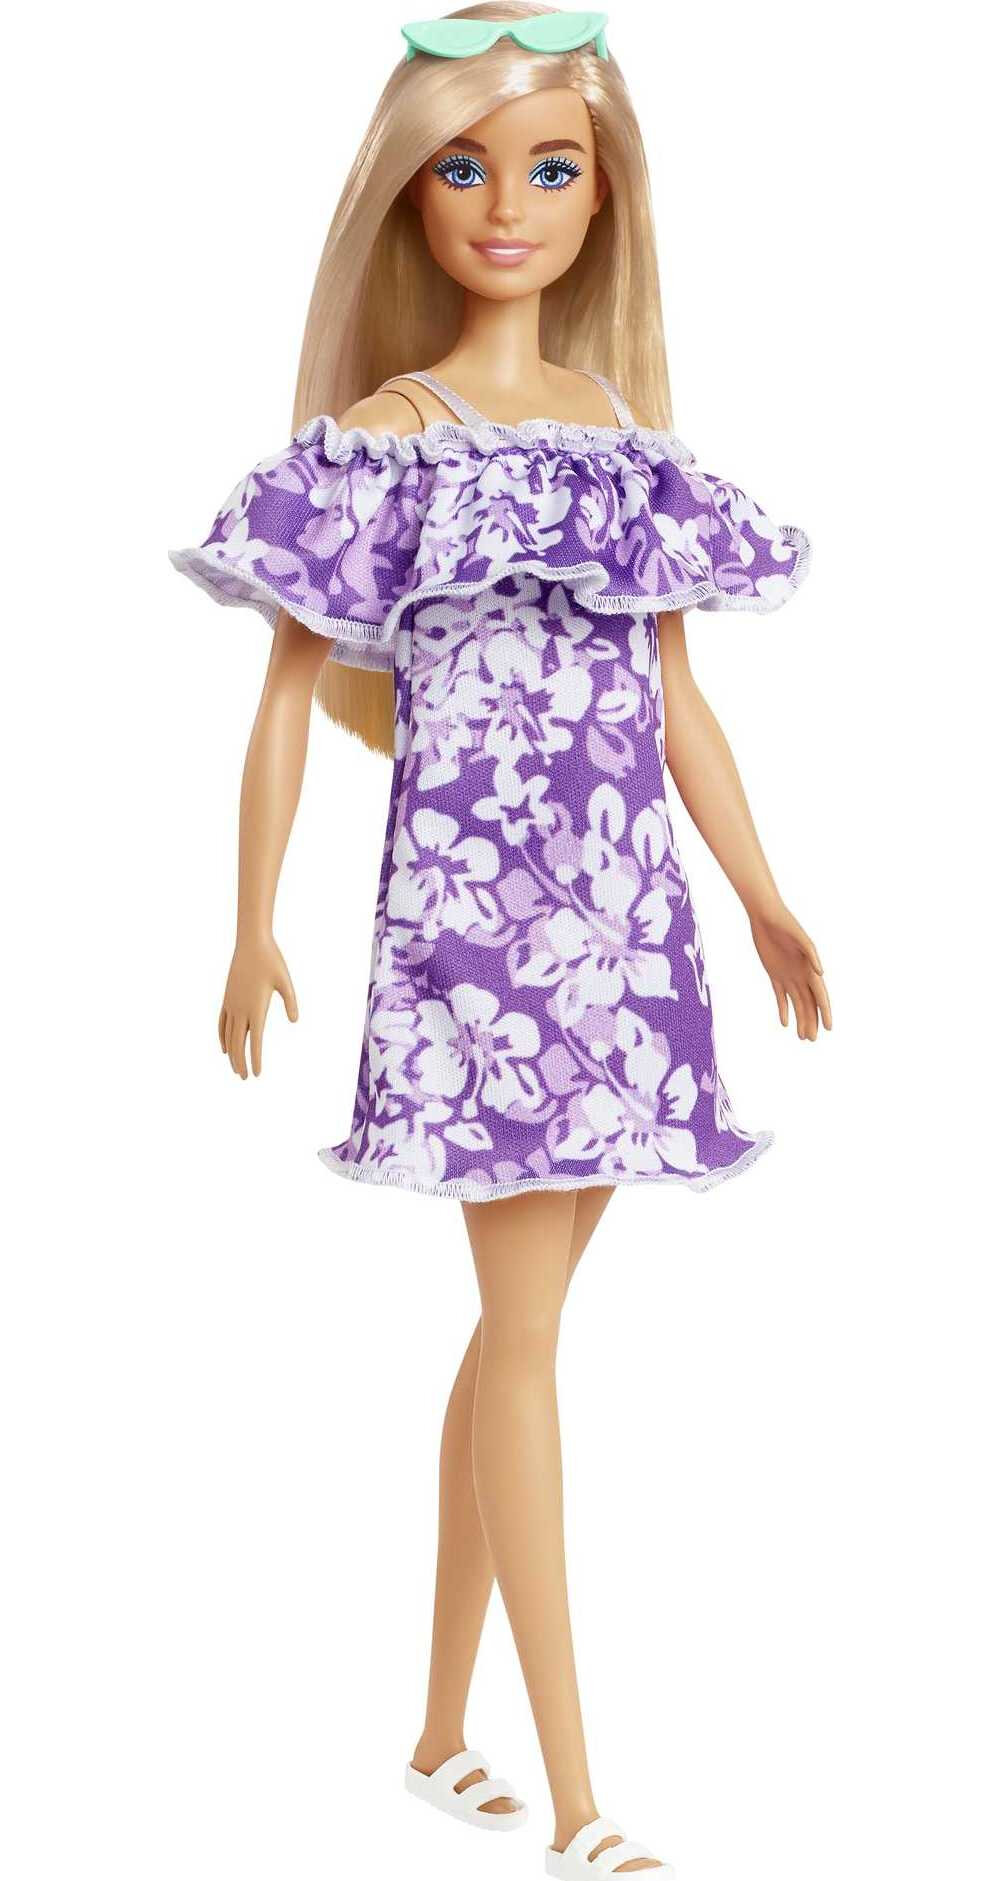 Barbie Loves the Ocean Beach Doll with Blonde Hair in Sundress, Made from Recycled Plastics - image 1 of 6